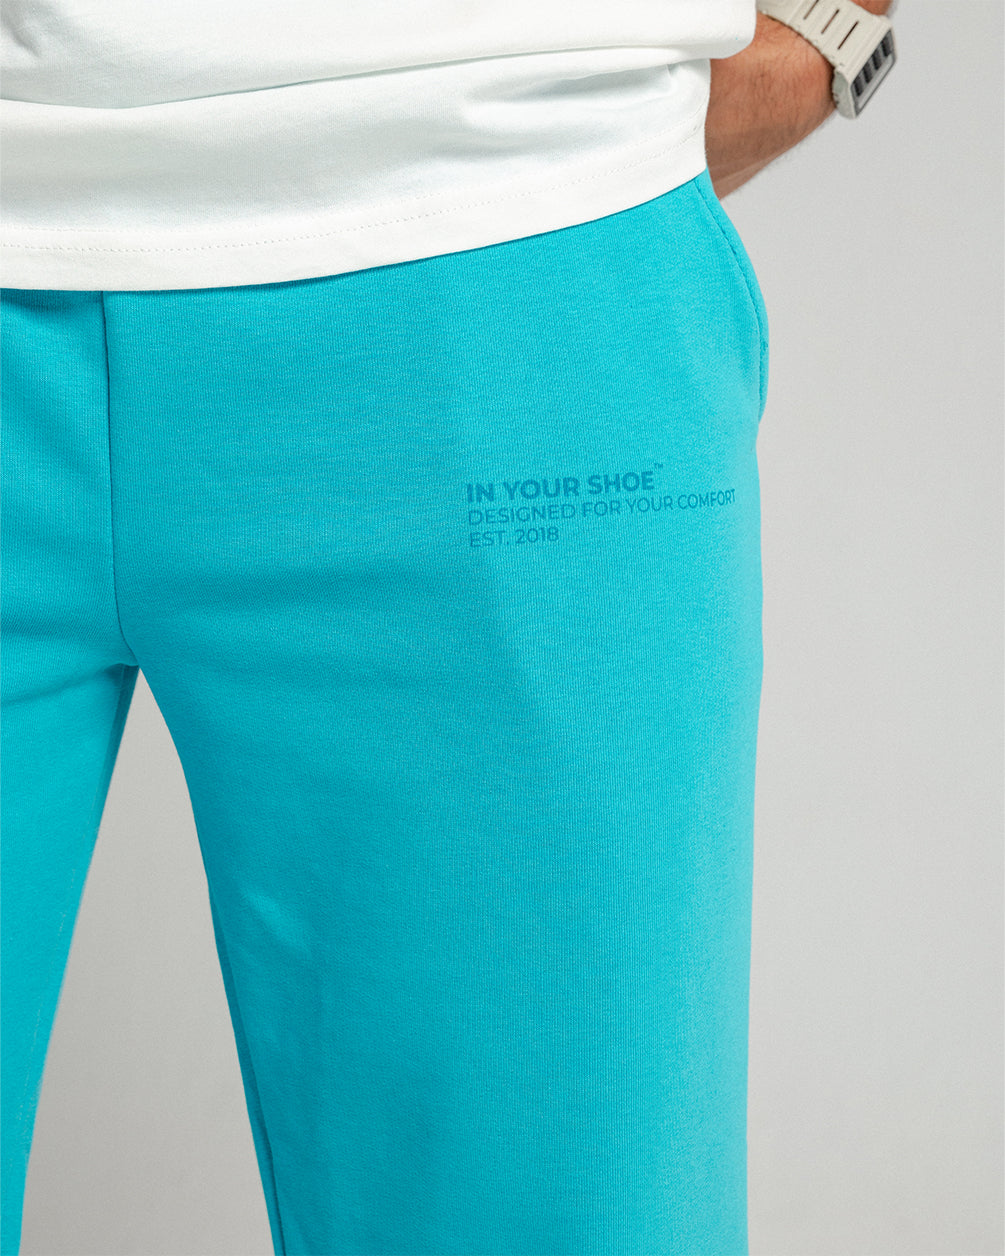 Turquoise Swants (Sweatpants) Swants IN YOUR SHOE L 